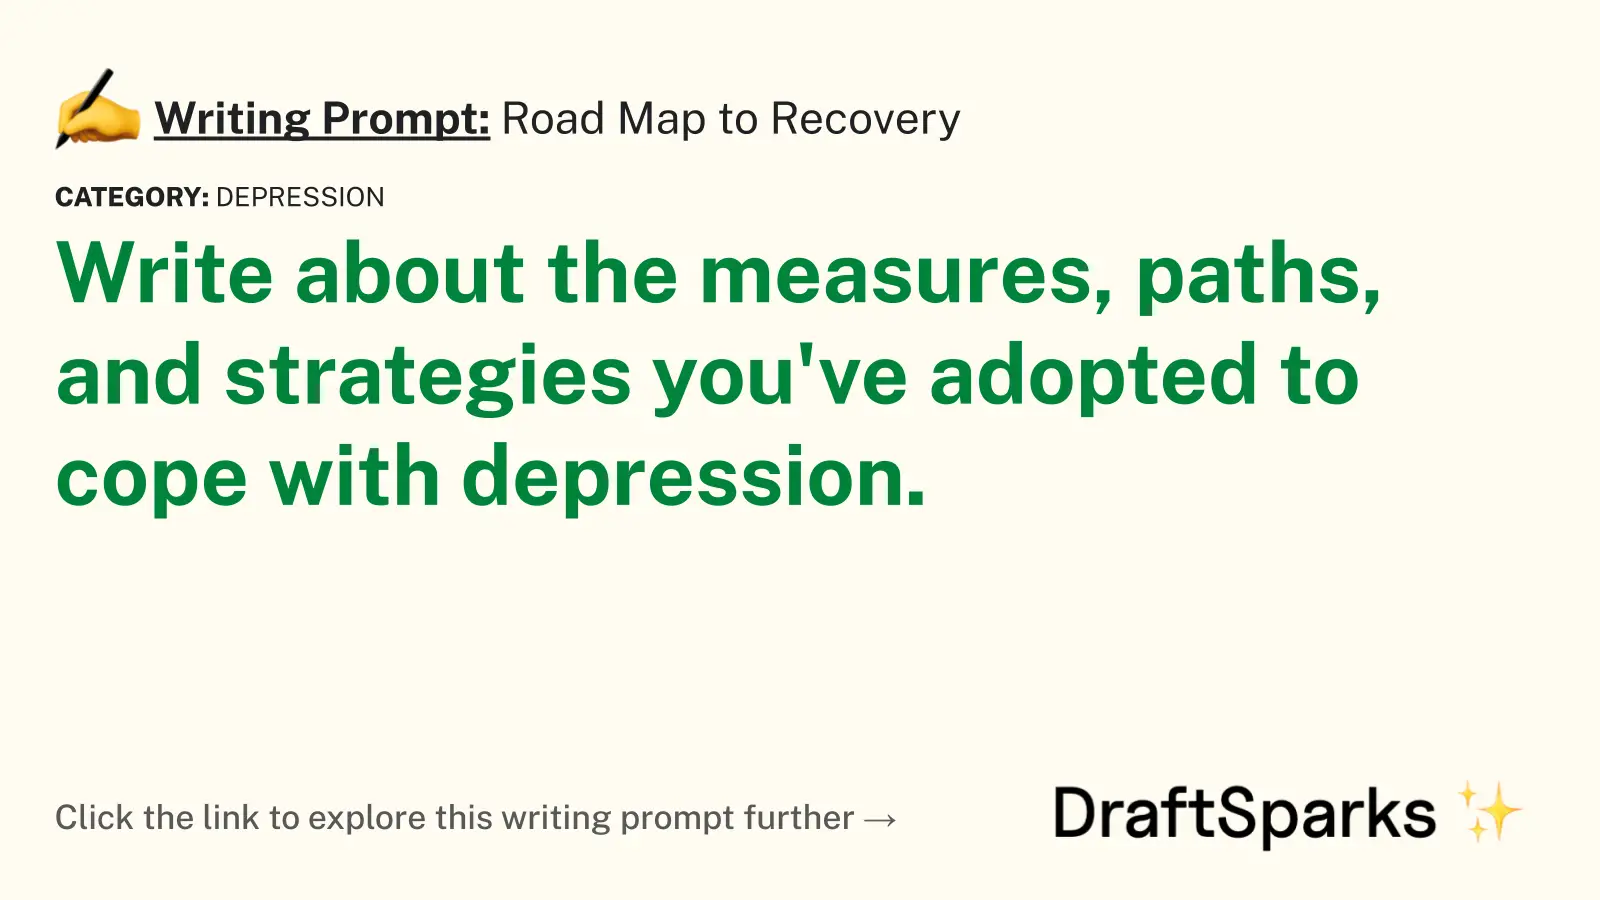 Road Map to Recovery